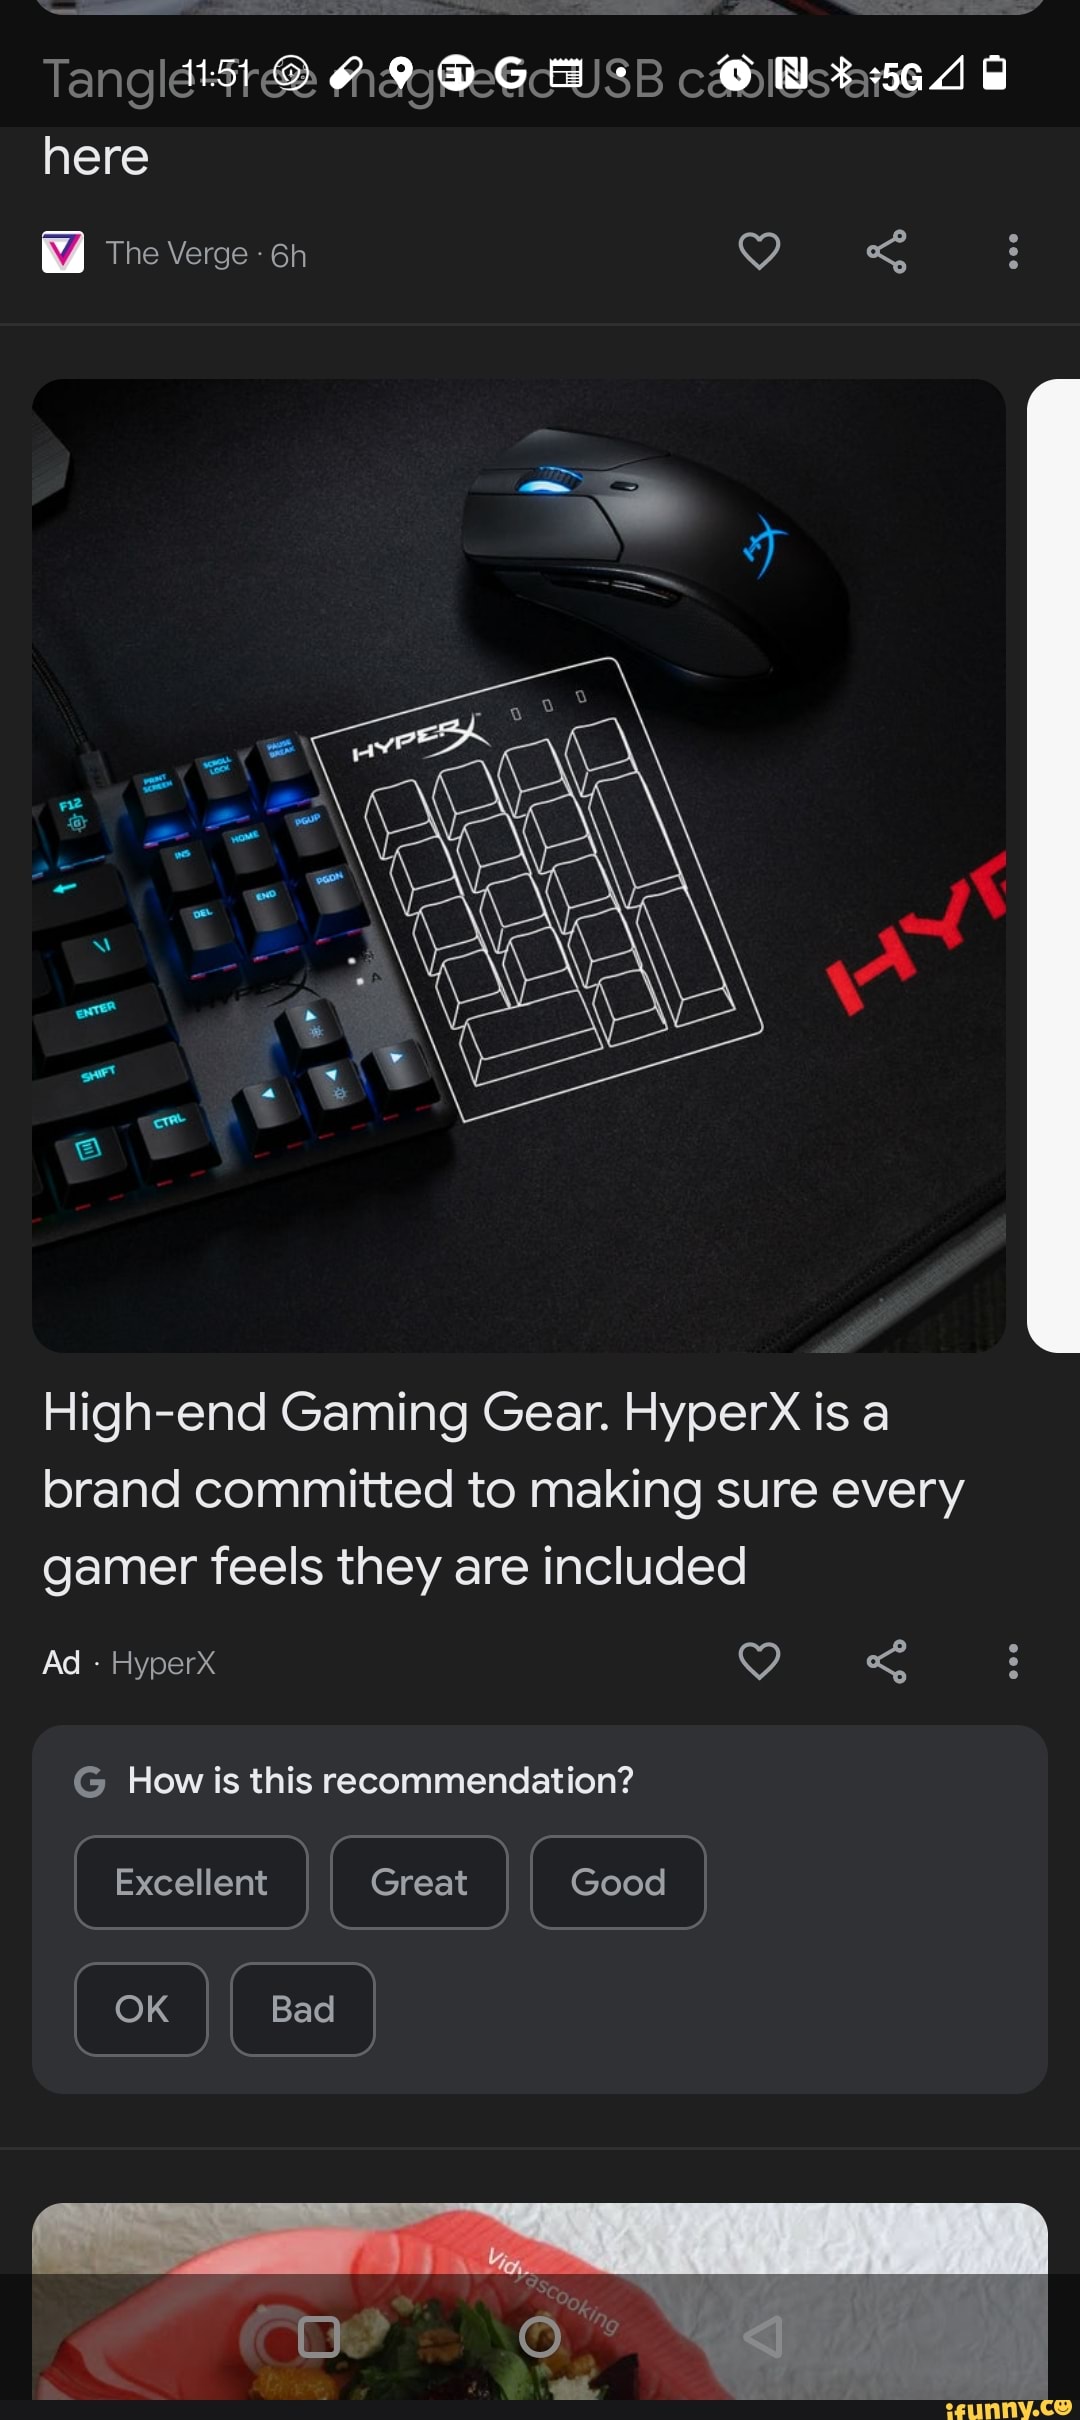 FROM RAVER TO GAMER: HYPERX has just Dropped “Touch Grass” Gaming  Peripherals - Magnetic Magazine